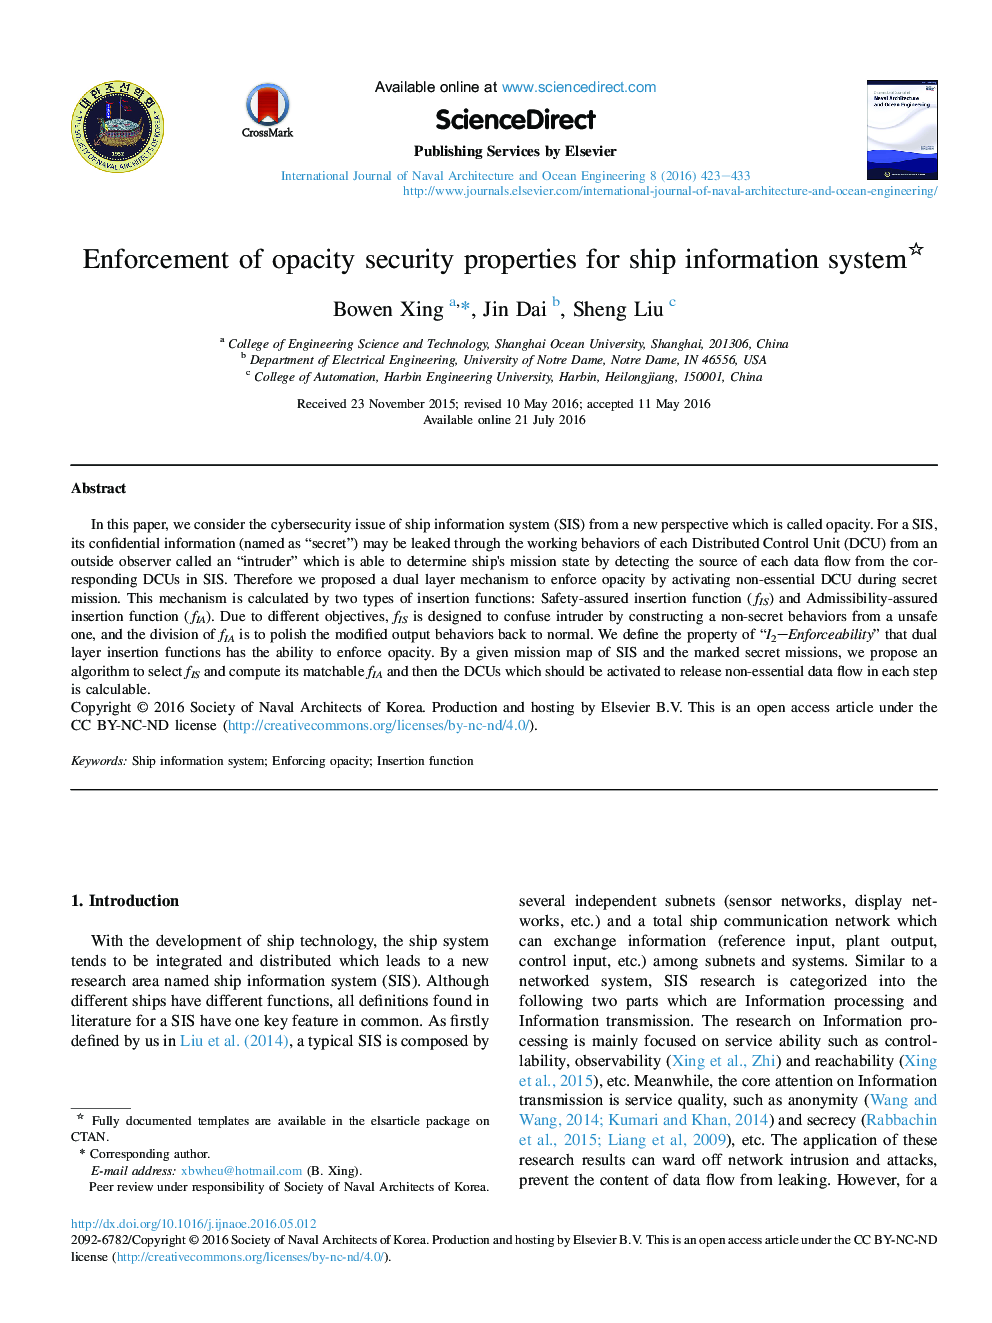 Enforcement of opacity security properties for ship information system 